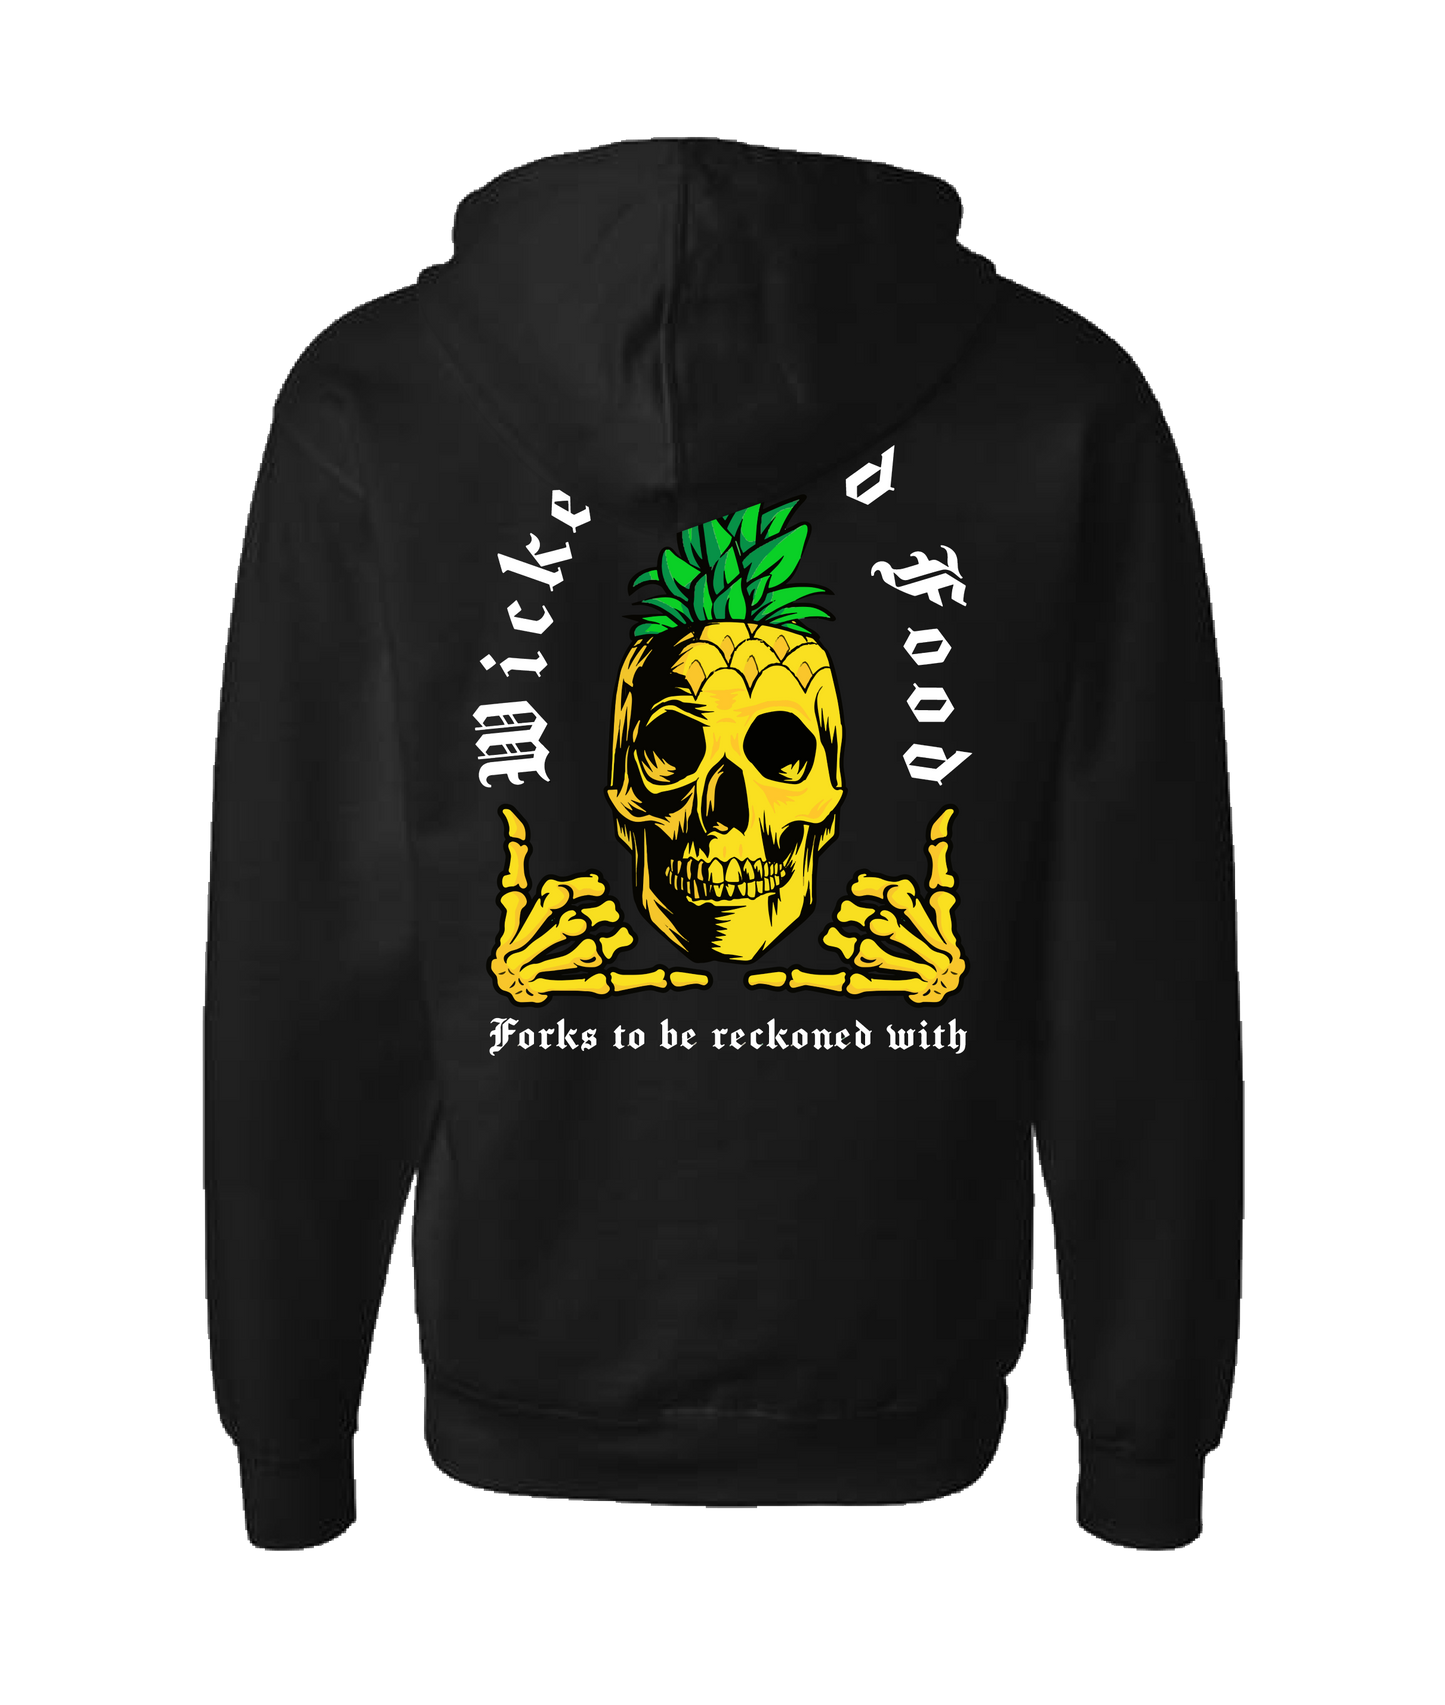 The Wicked Kitchen - Forks to be Reckoned With - Black Zip Up Hoodie